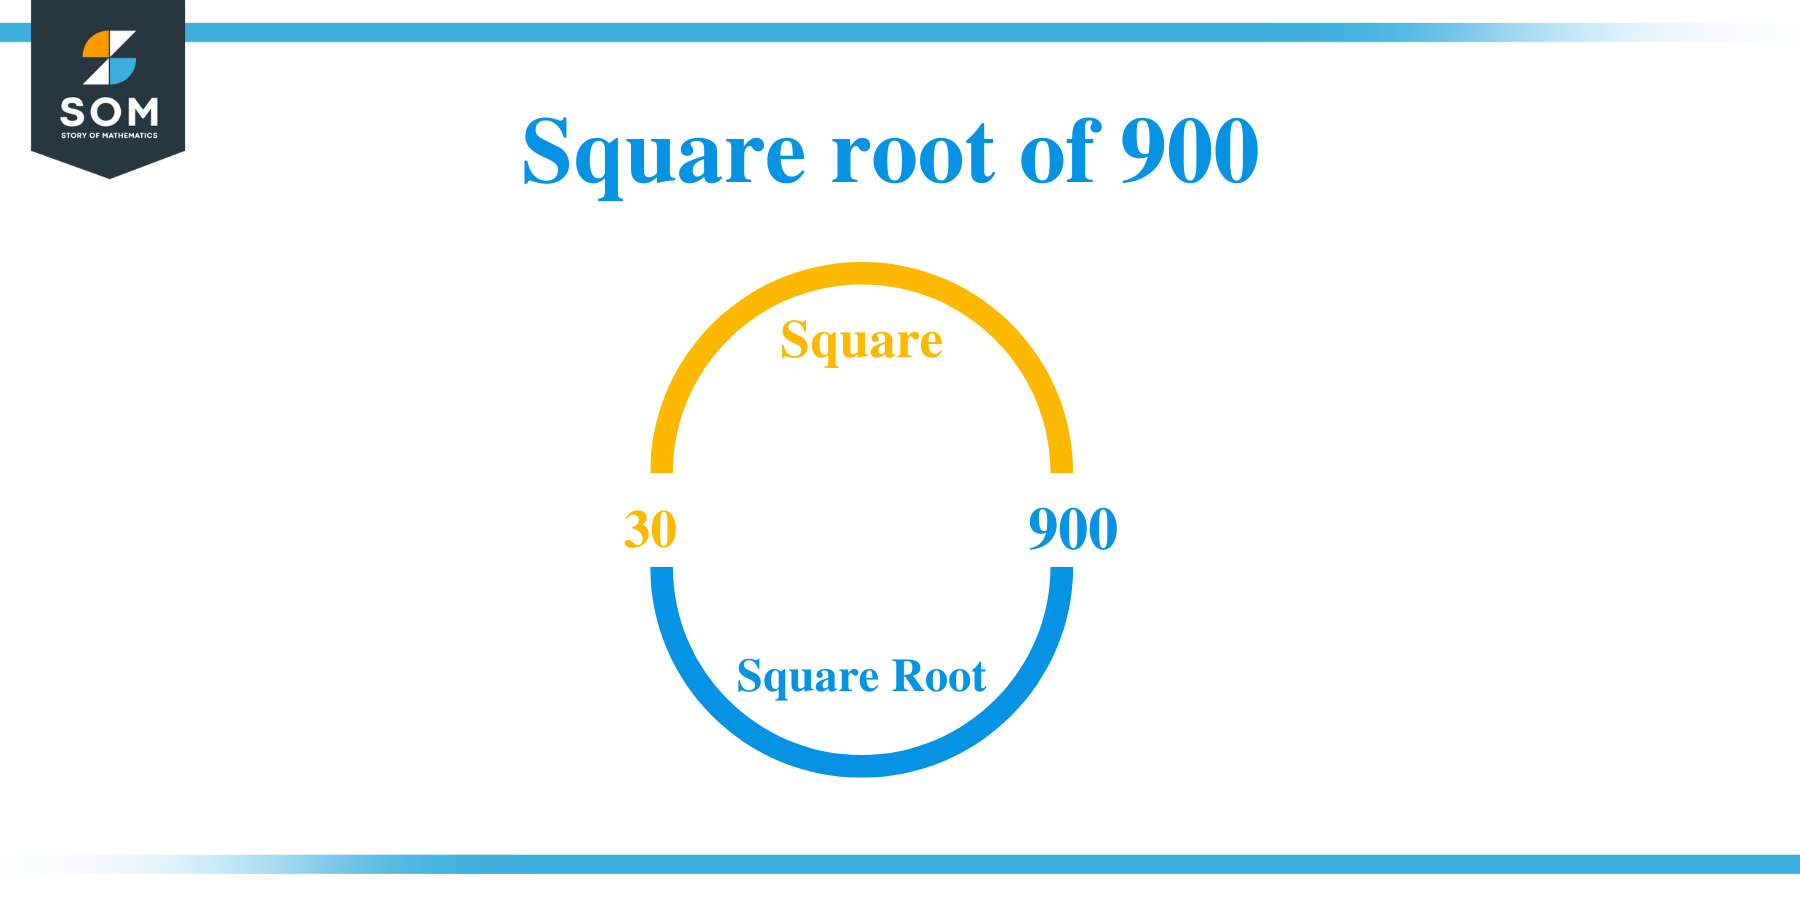 Square root of 900